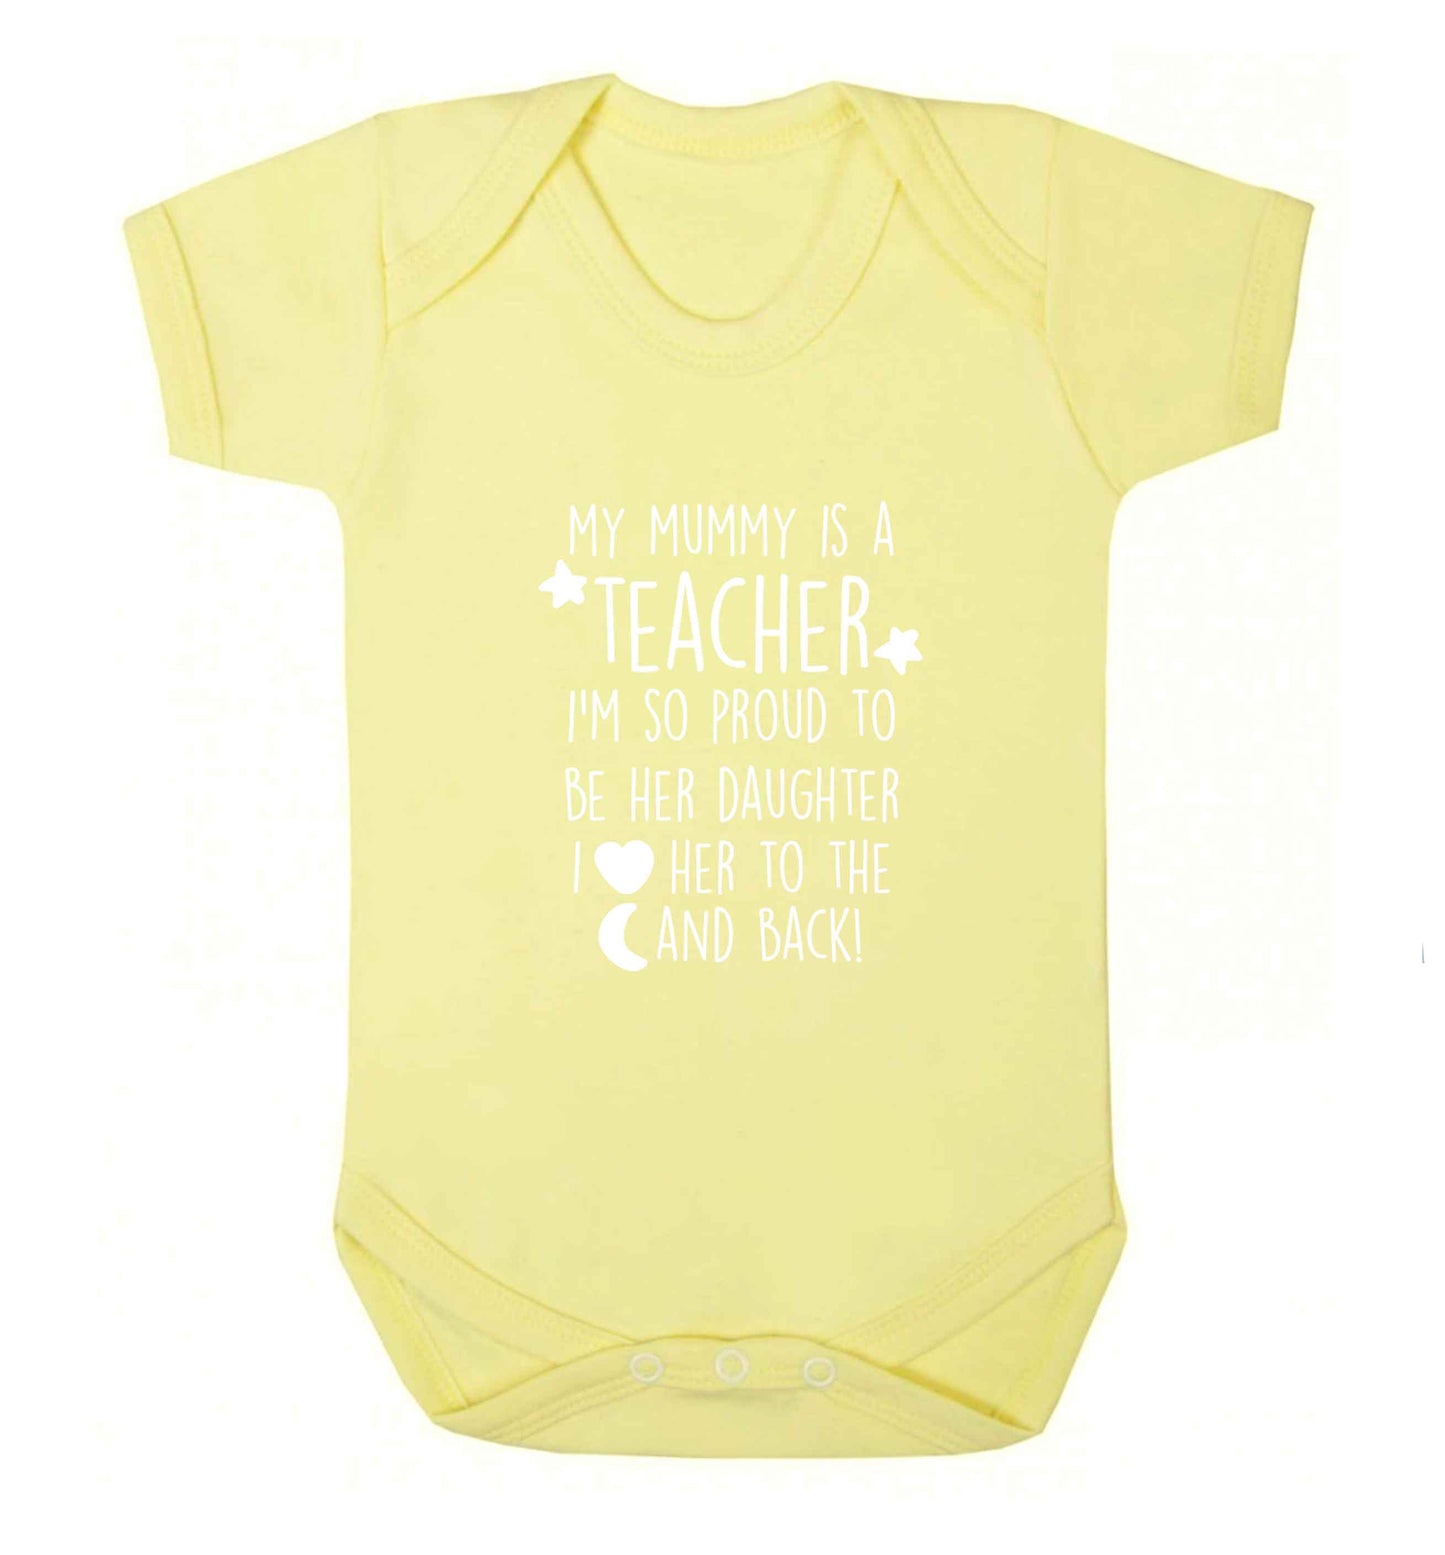 My mummy is a teacher I'm so proud to be her daughter I love her to the moon and back baby vest pale yellow 18-24 months